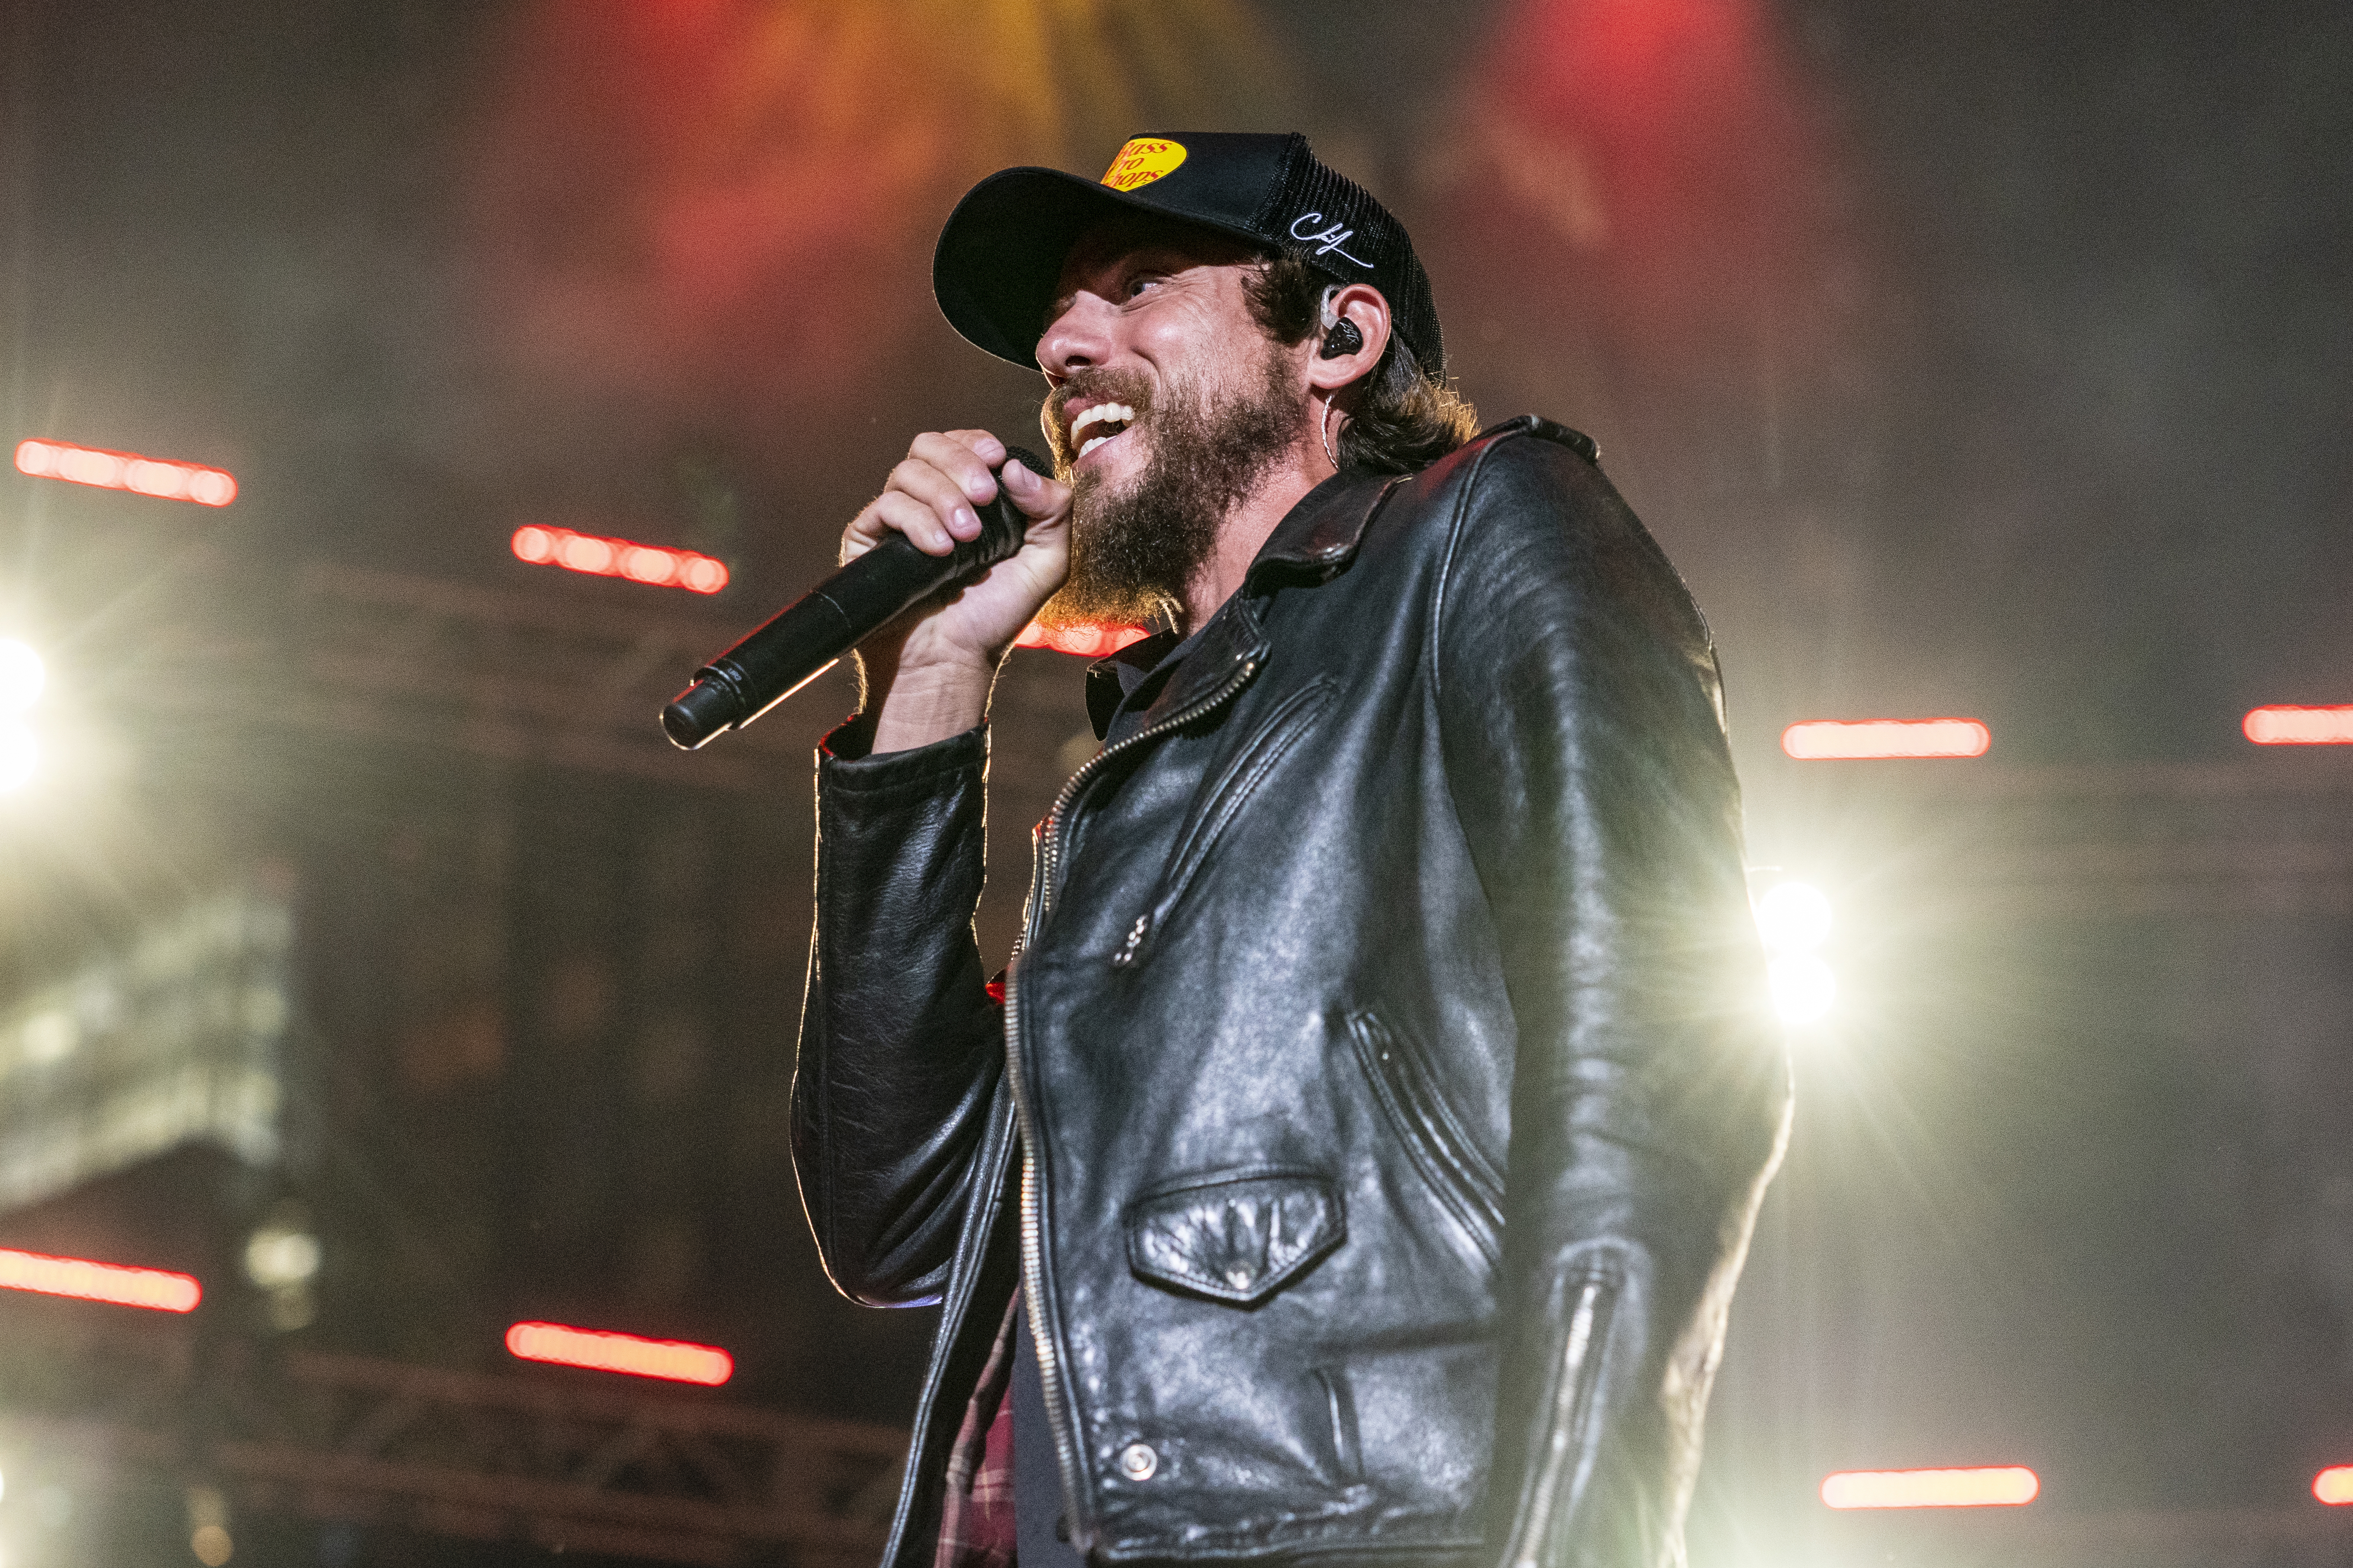 Chris Janson performs at the CMA Fest 2022 in Nashville, Tennessee. | Source: Getty Images